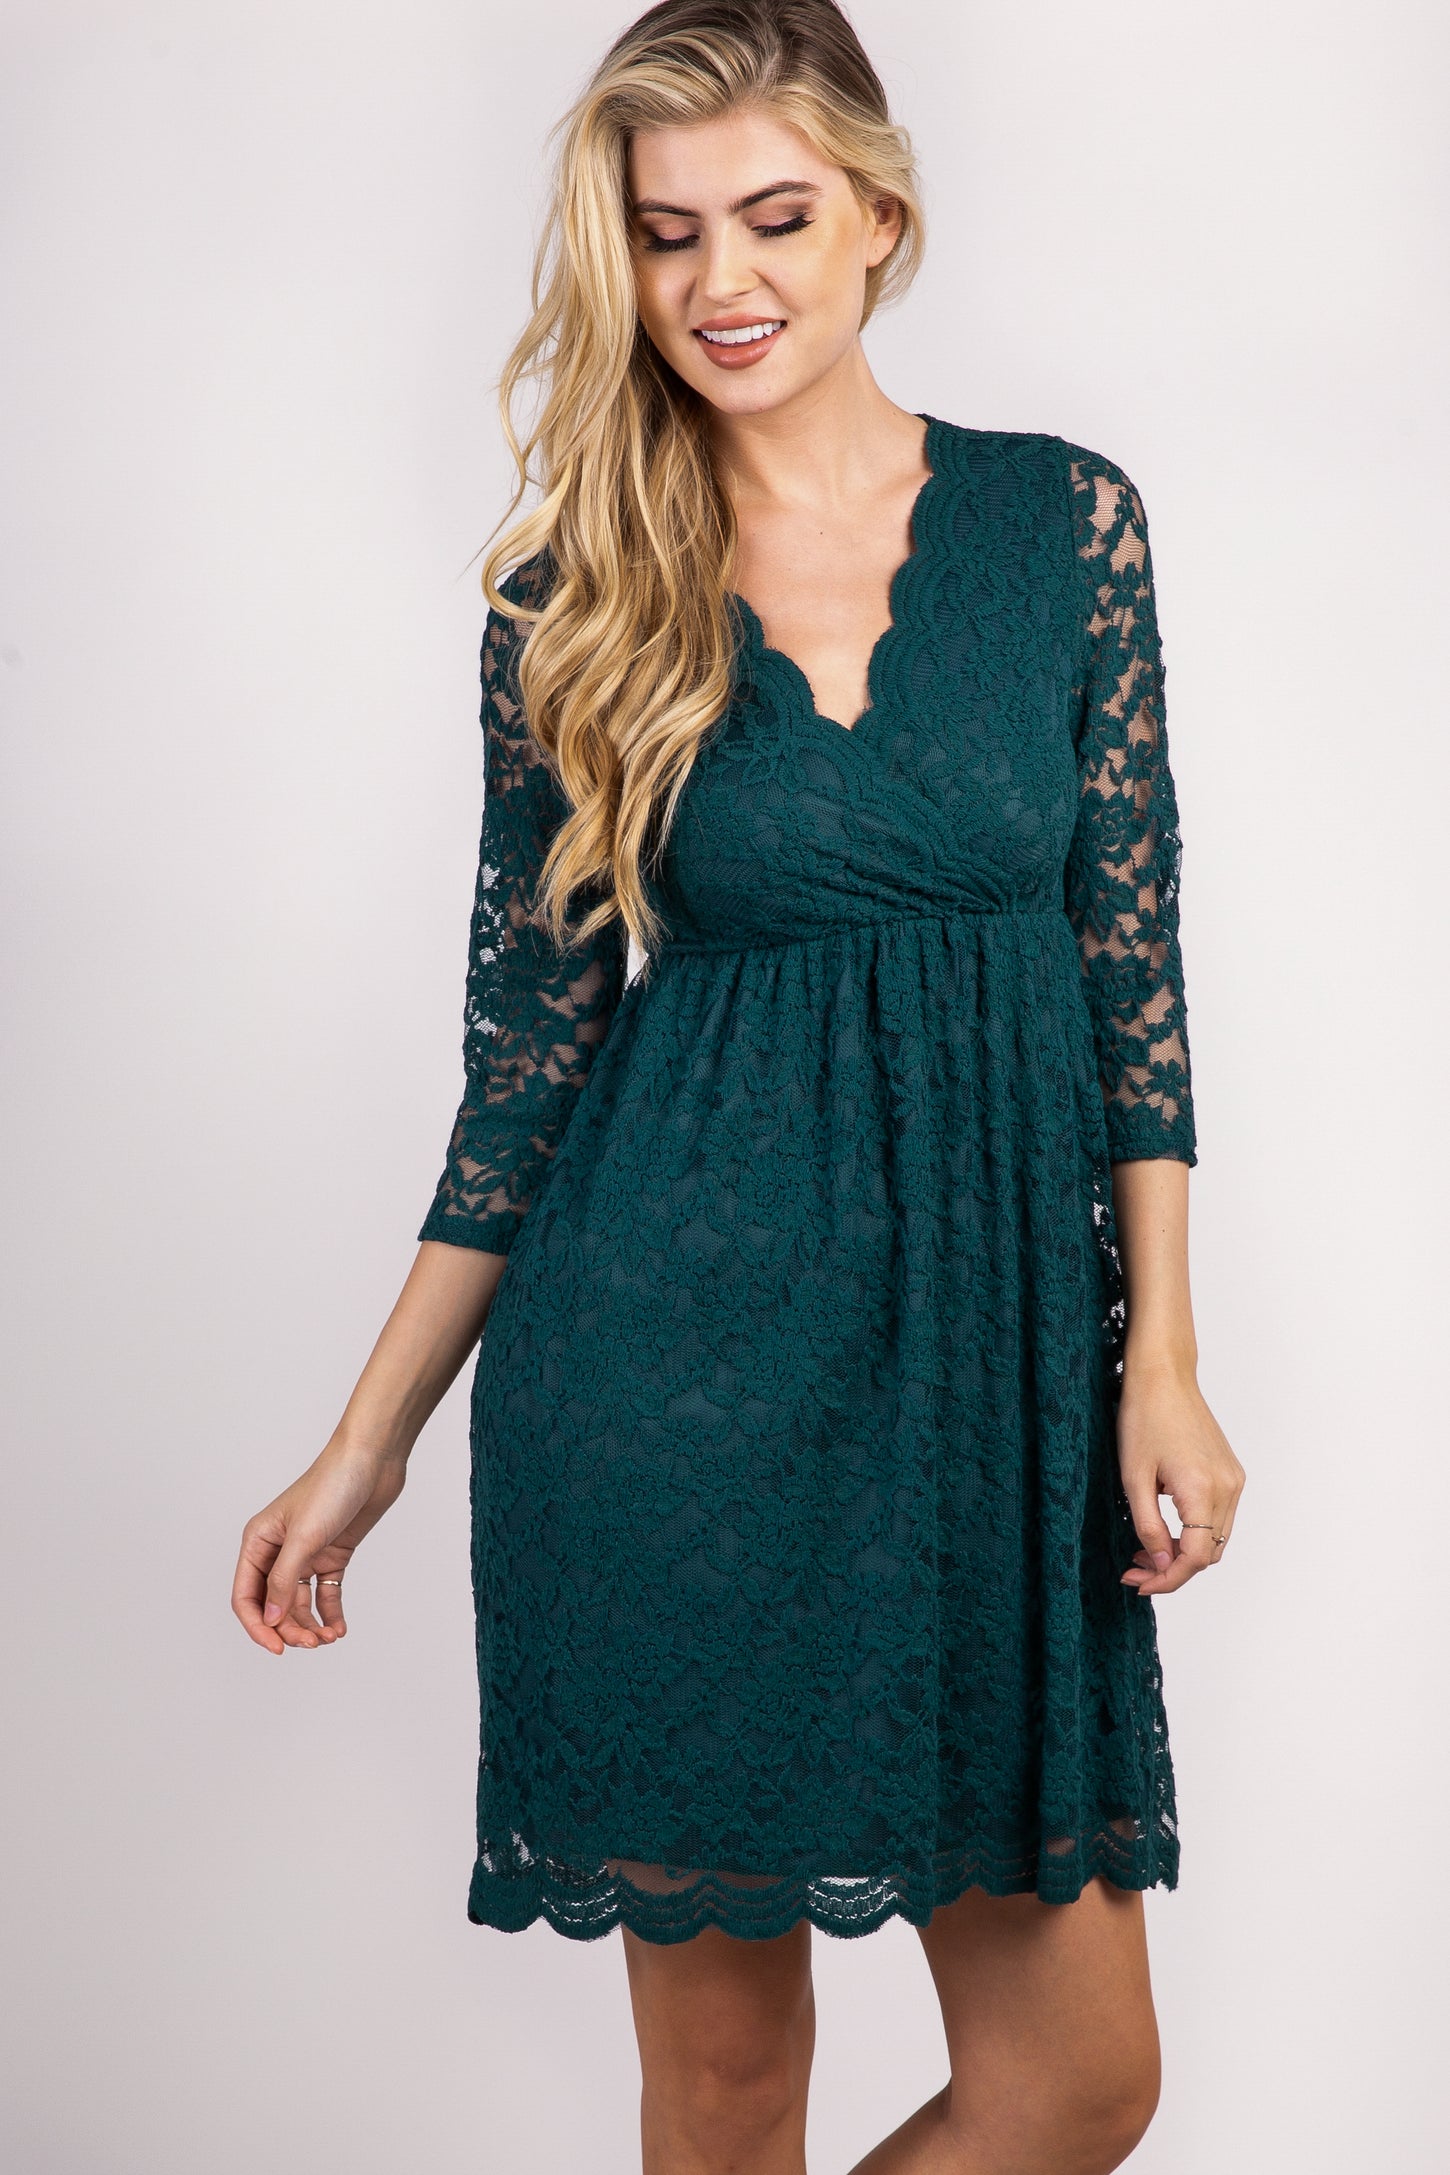 Overlay Lace Green PinkBlush Wrap Dress– Forest